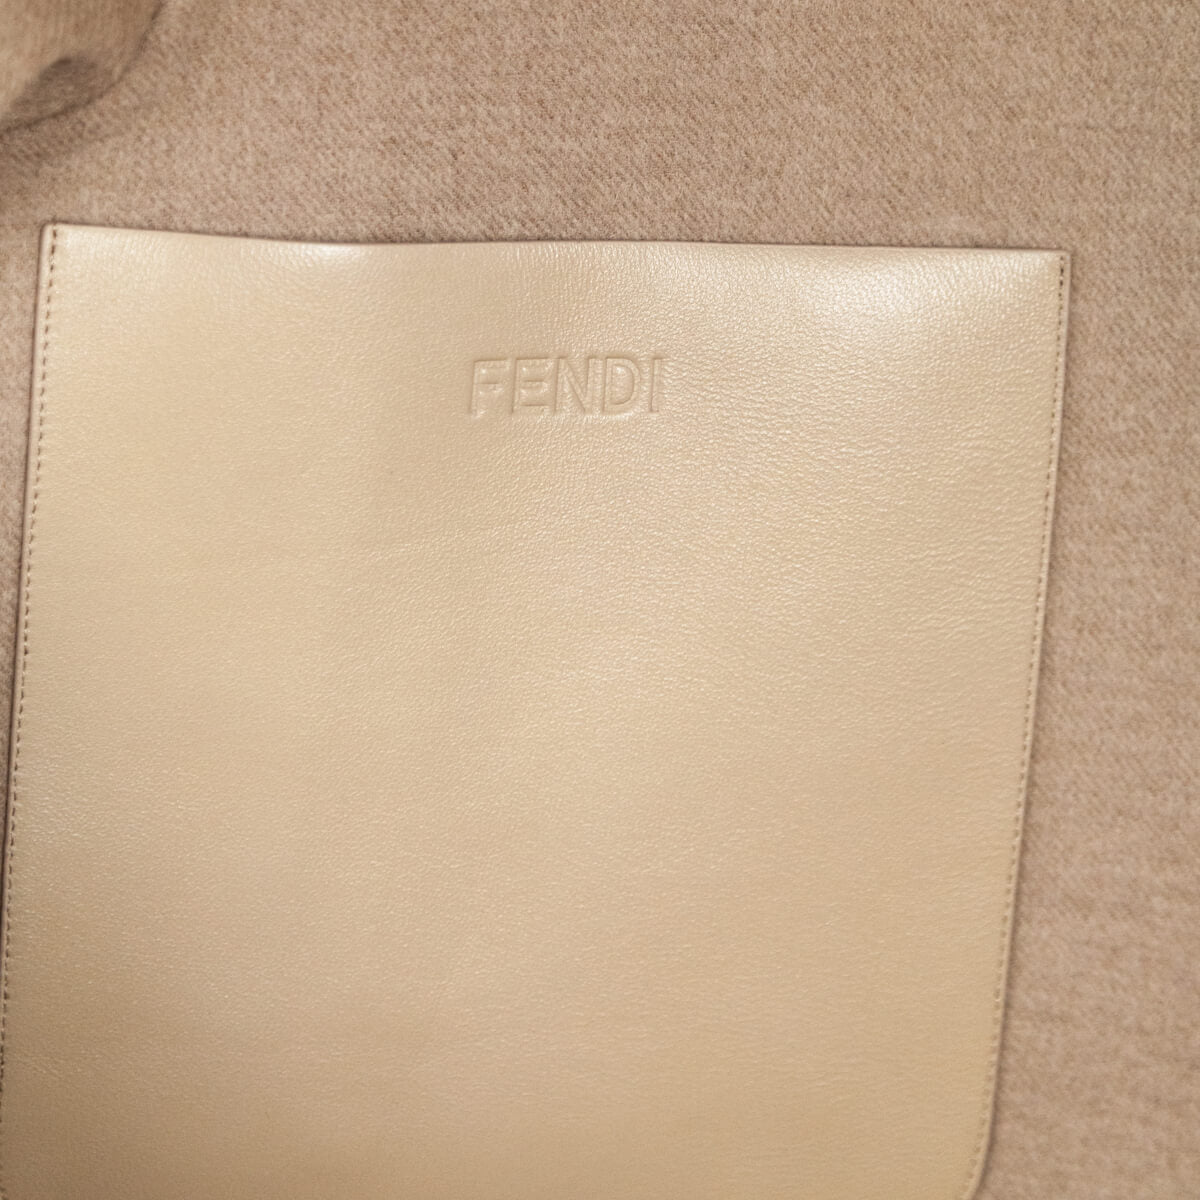 Fendi Beige Wool Reversible Jacket Size XS | IT 36 - Love that Bag etc - Preowned Authentic Designer Handbags & Preloved Fashions